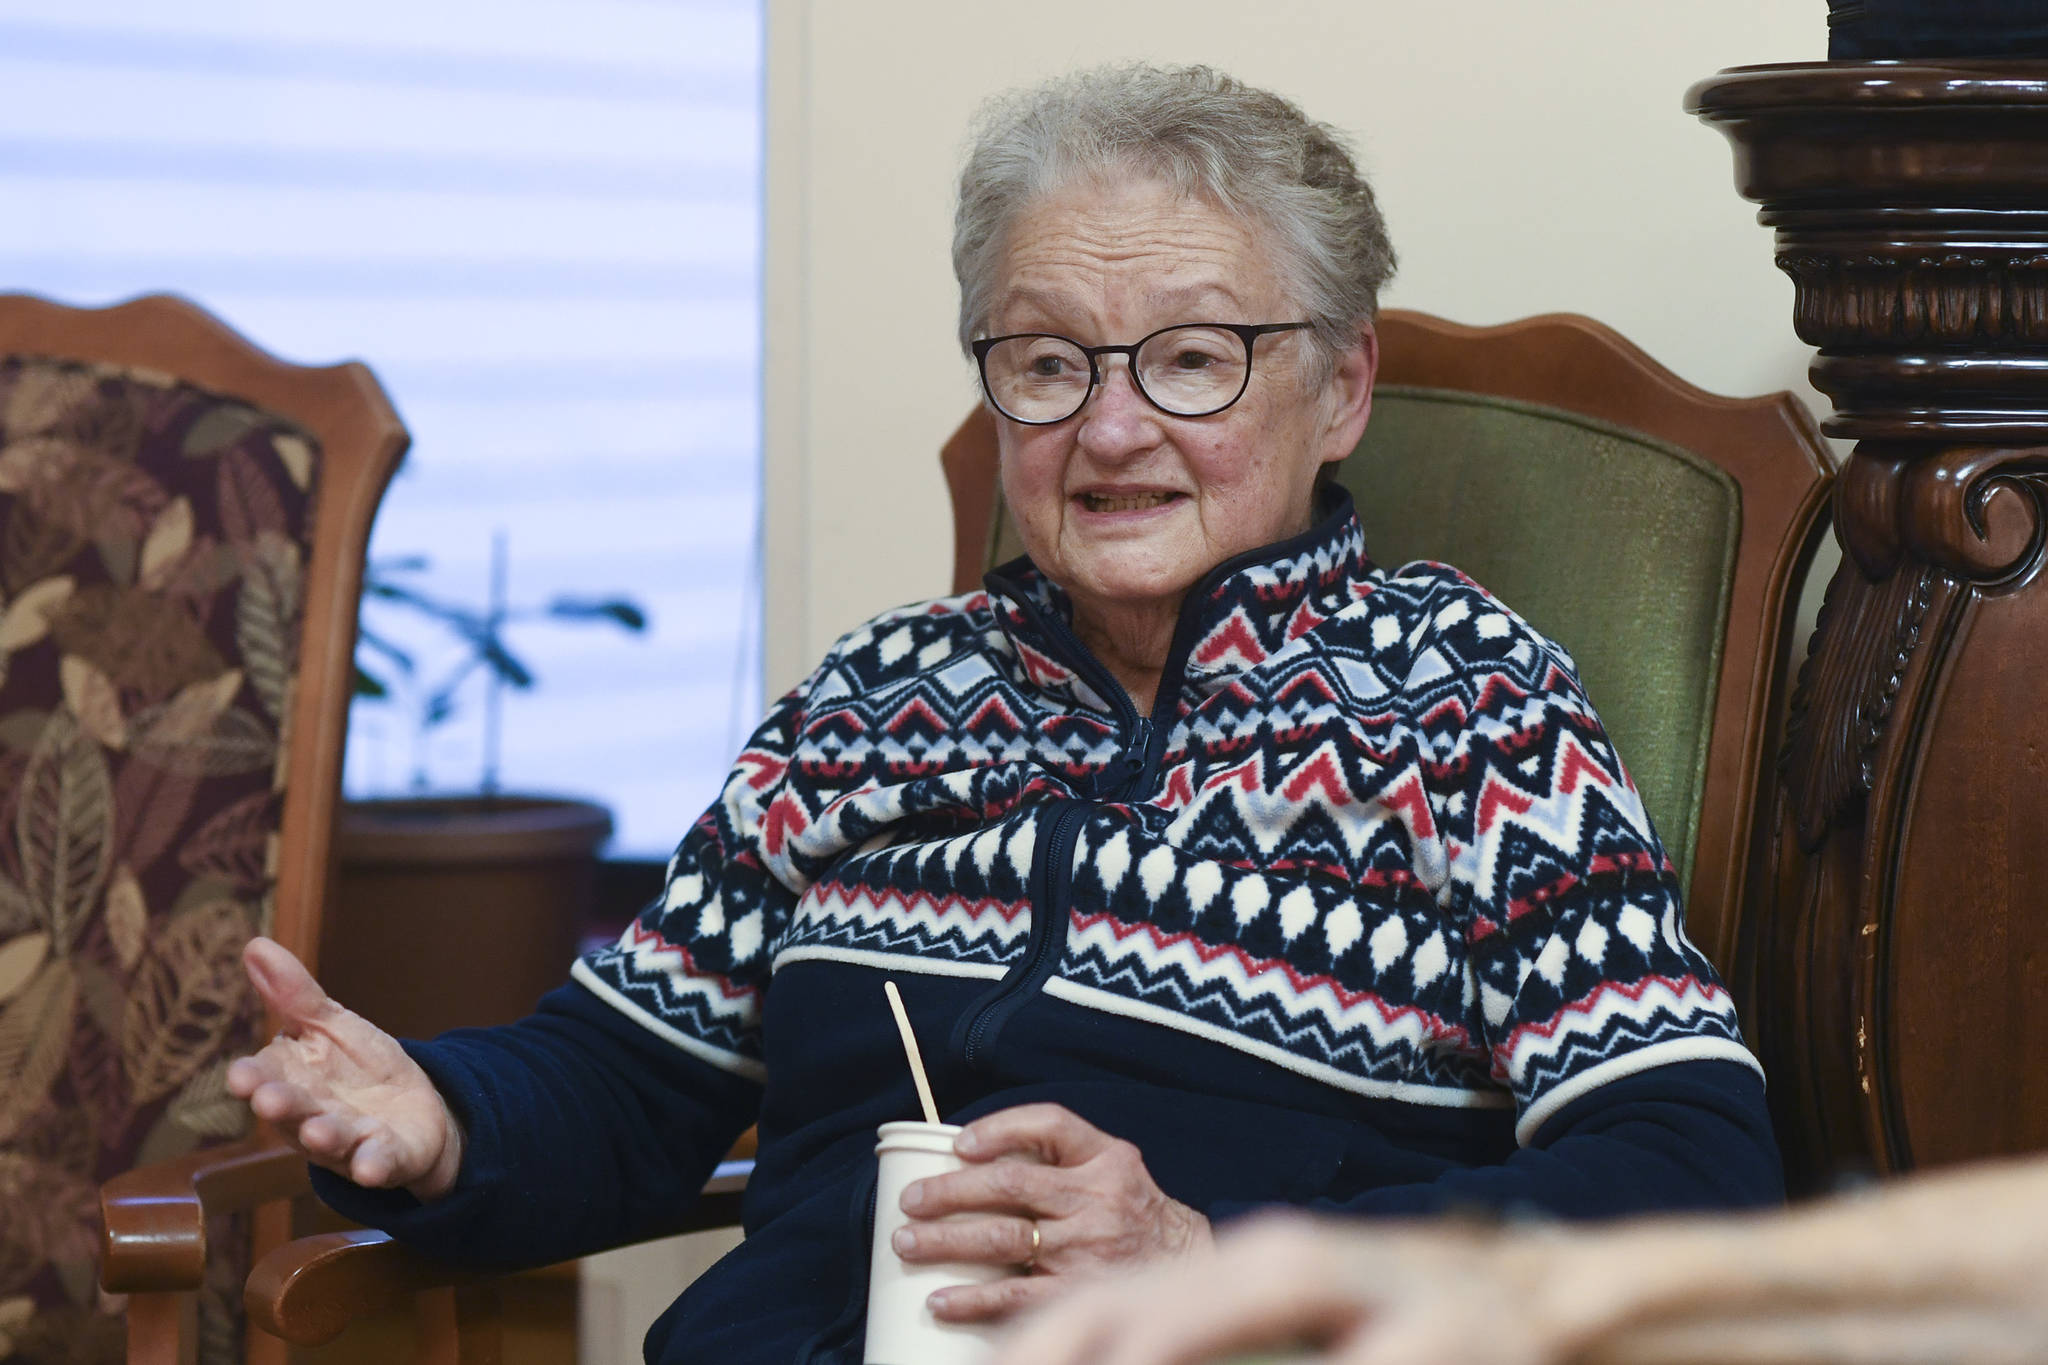 Katie Hursh speaks about being a resident at the Juneau Pioneer Home on Thursday, Nov. 14, 2019. She and her husband have lived in the home for four years. (Michael Penn | Juneau Empire)